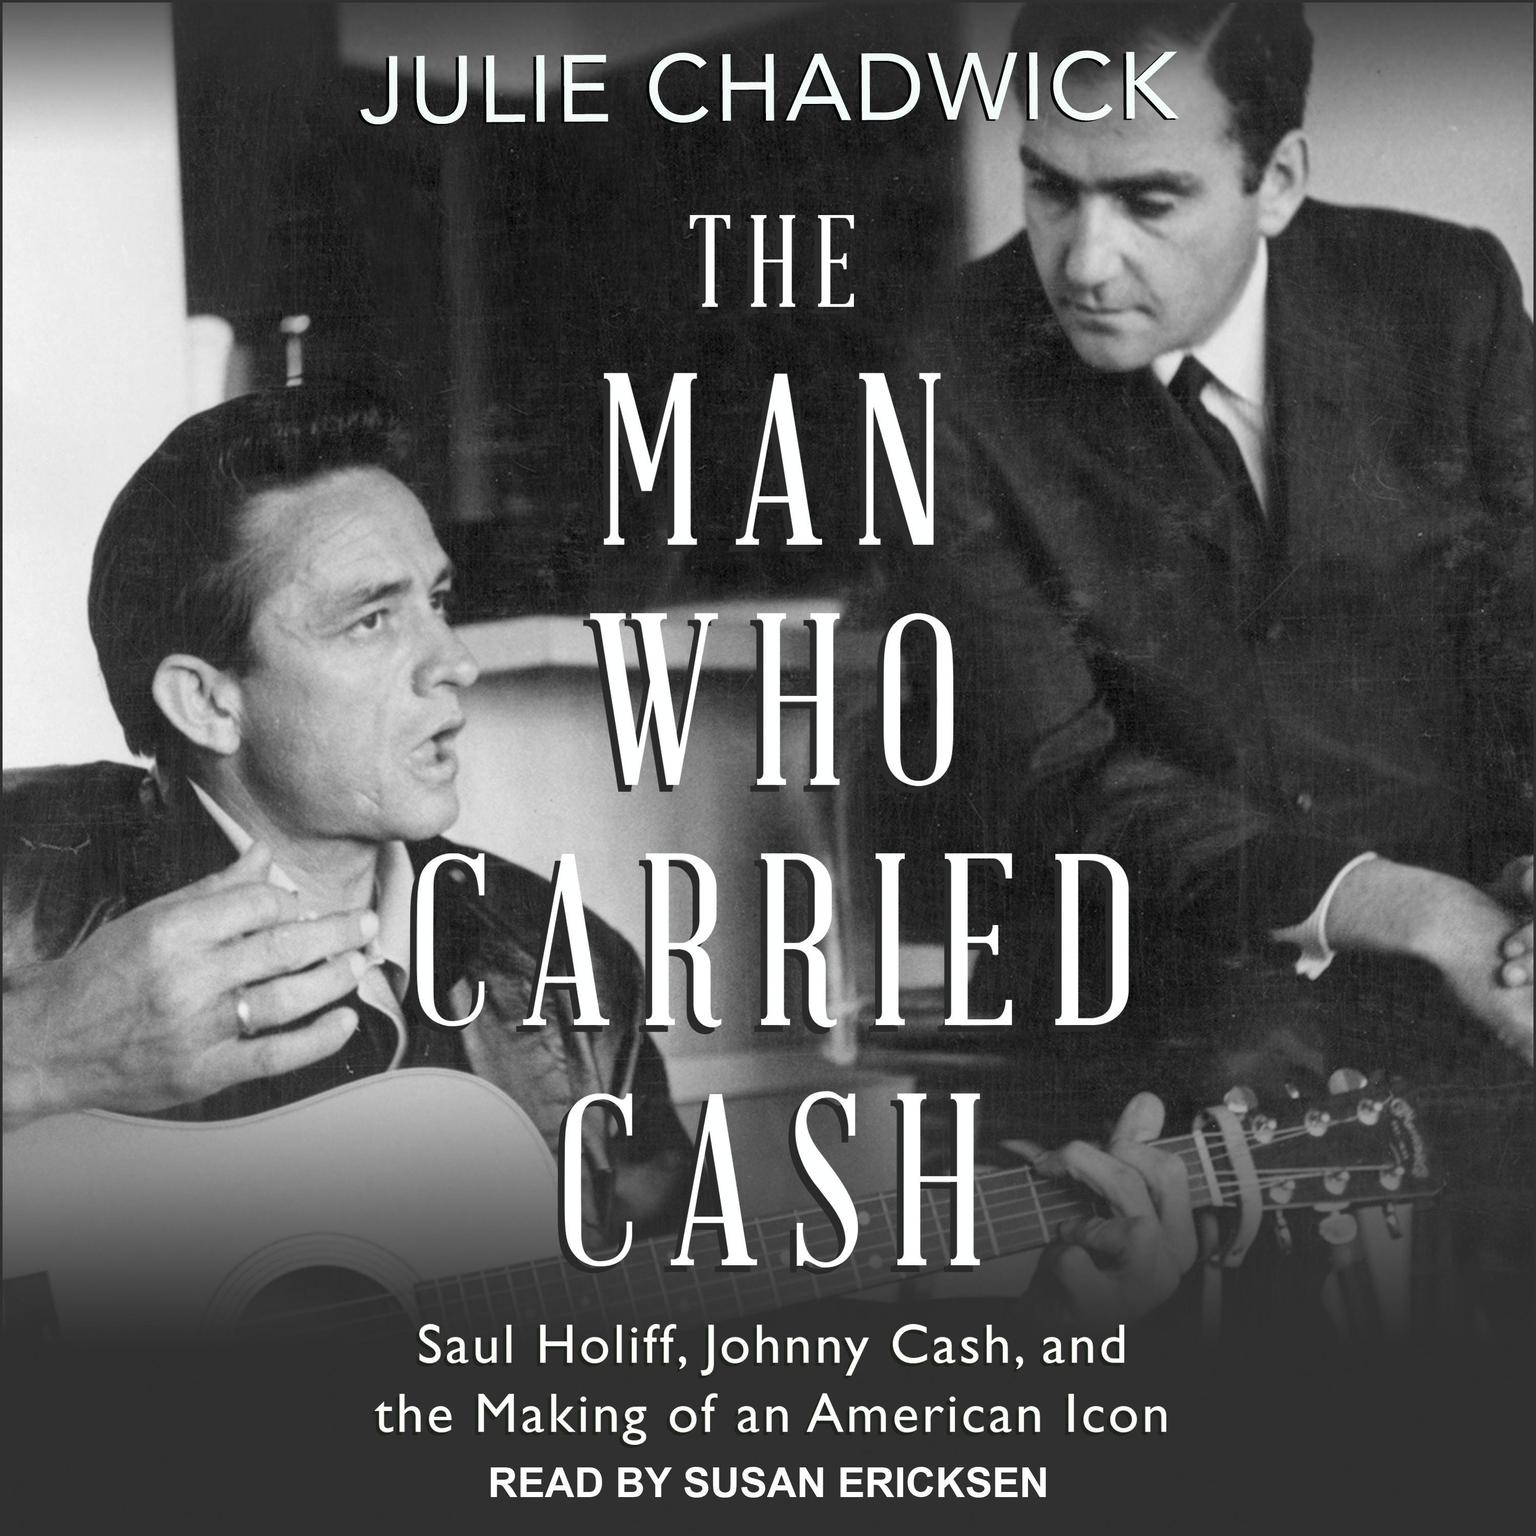 The Man Who Carried Cash: Saul Holiff, Johnny Cash, and the Making of an American Icon Audiobook, by Julie Chadwick